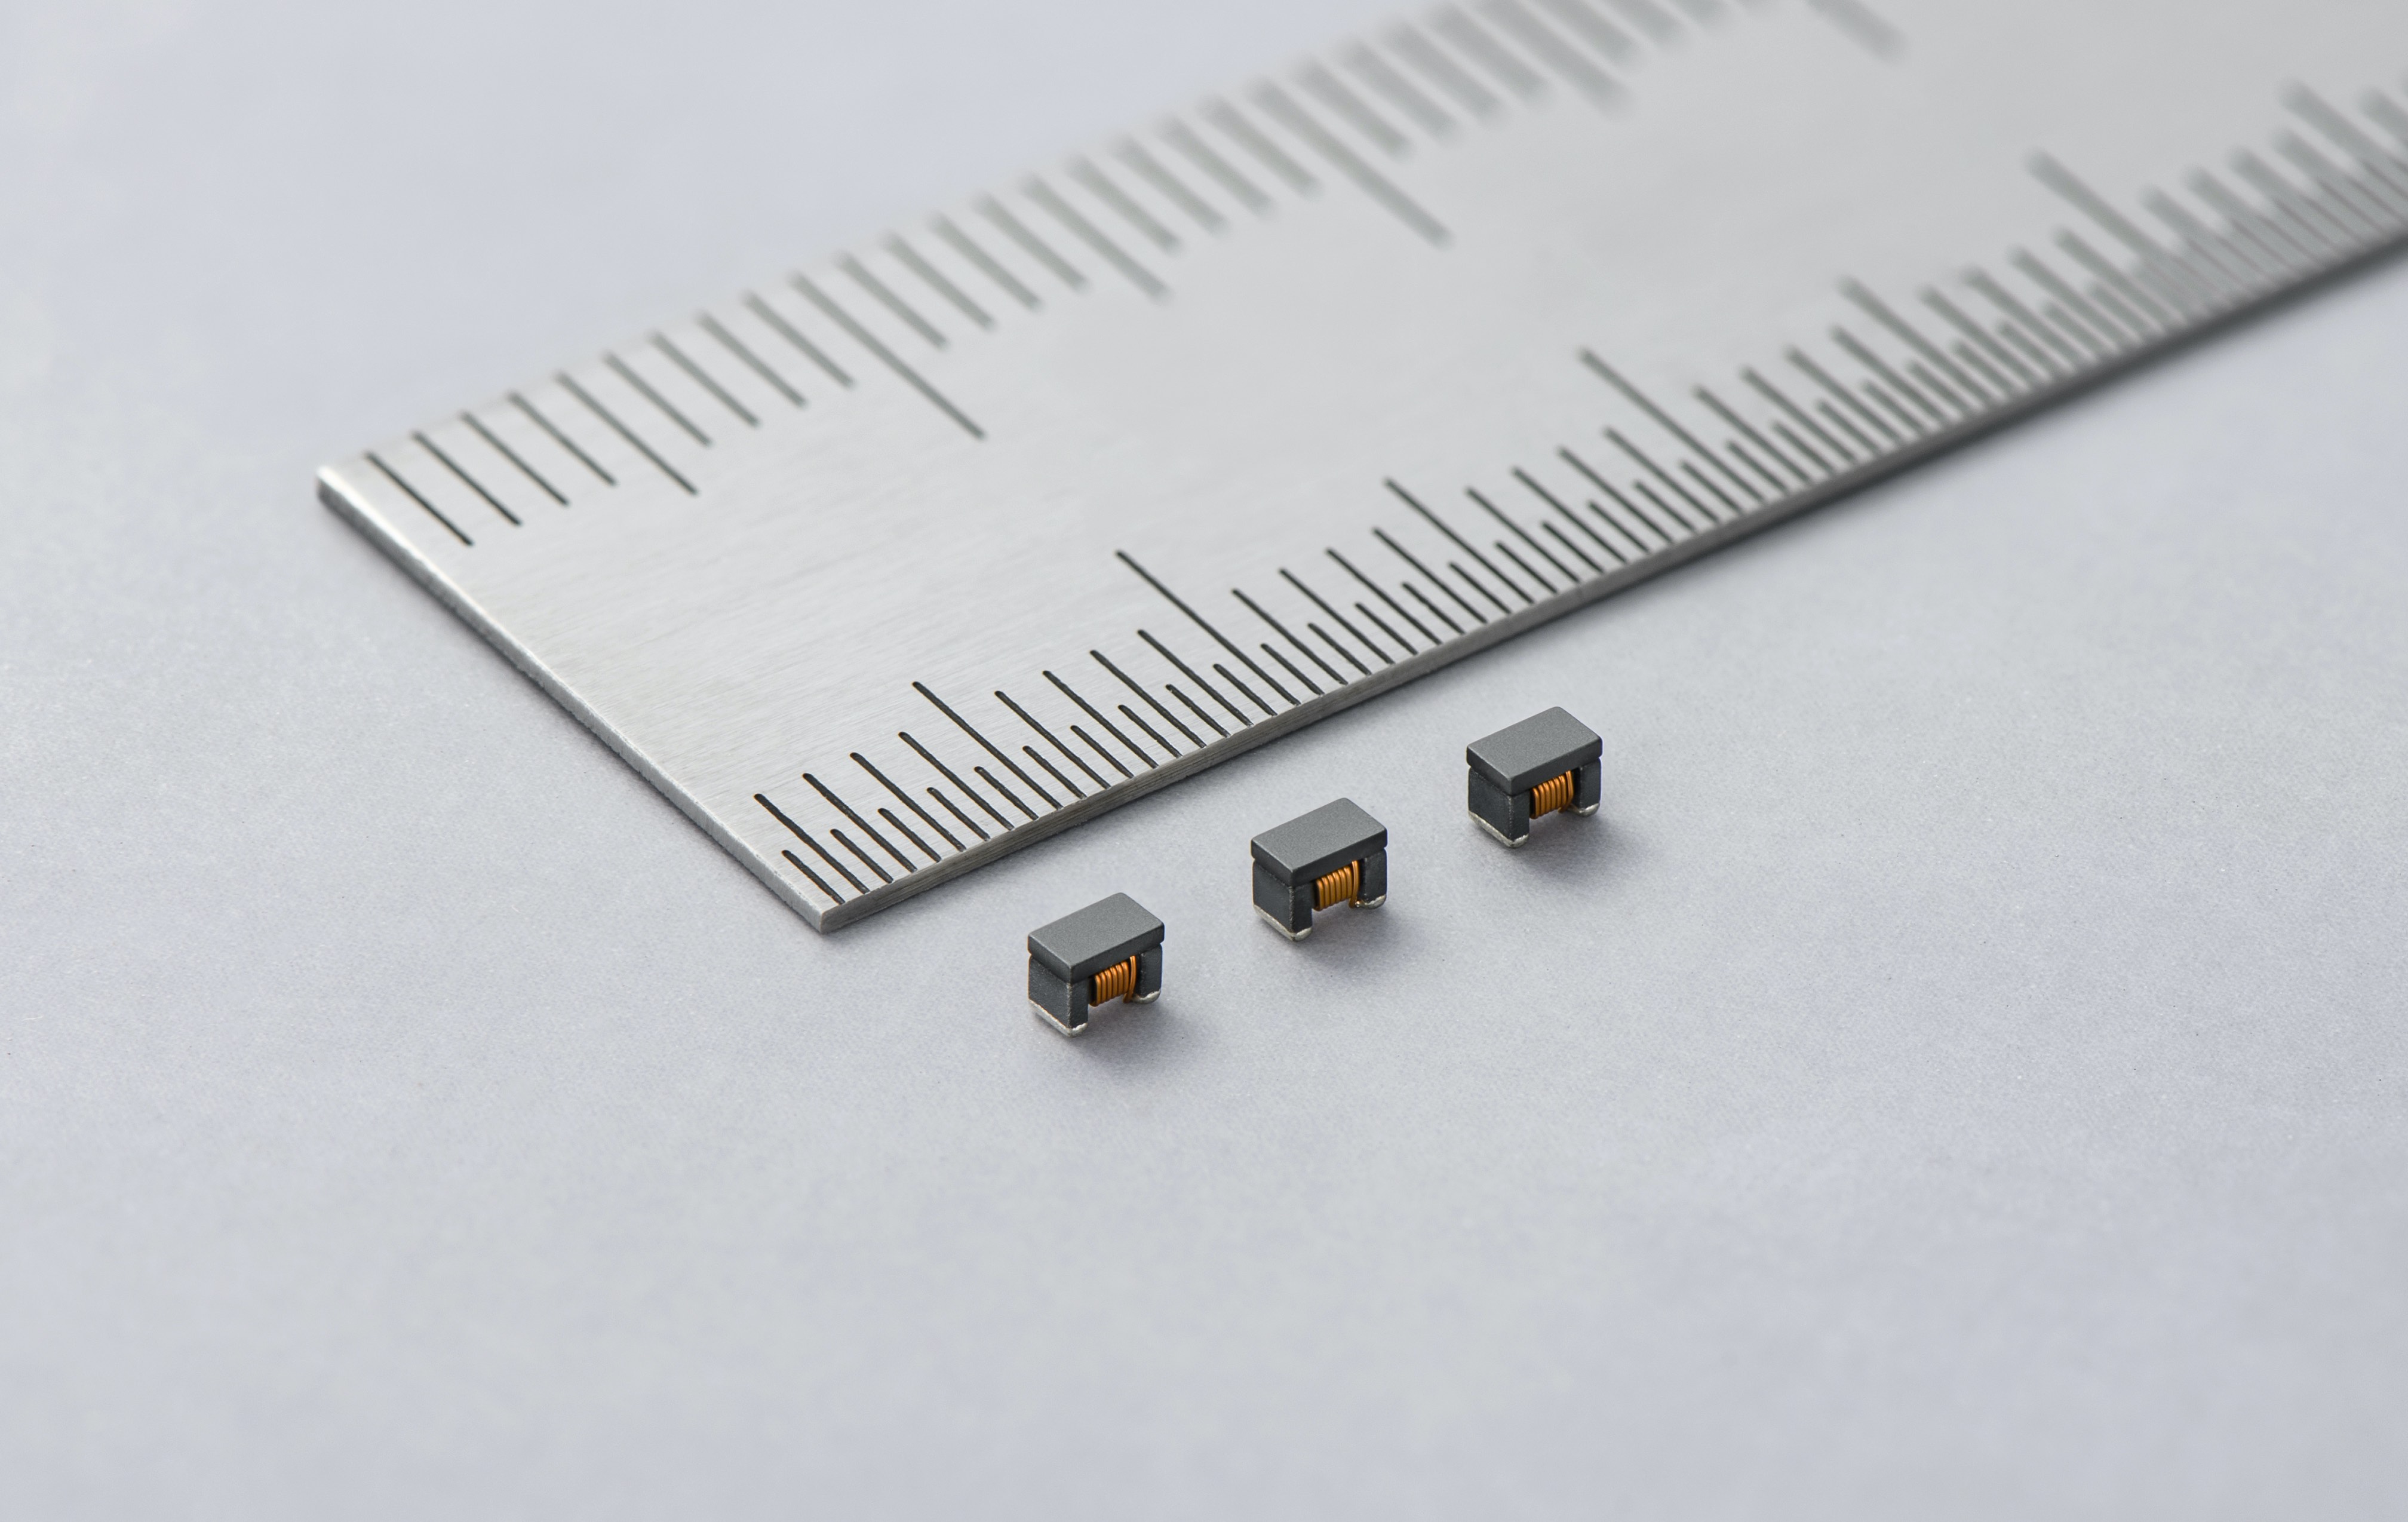 AEC-Q200-Compliant Inductors for In-Vehicle PoC Systems